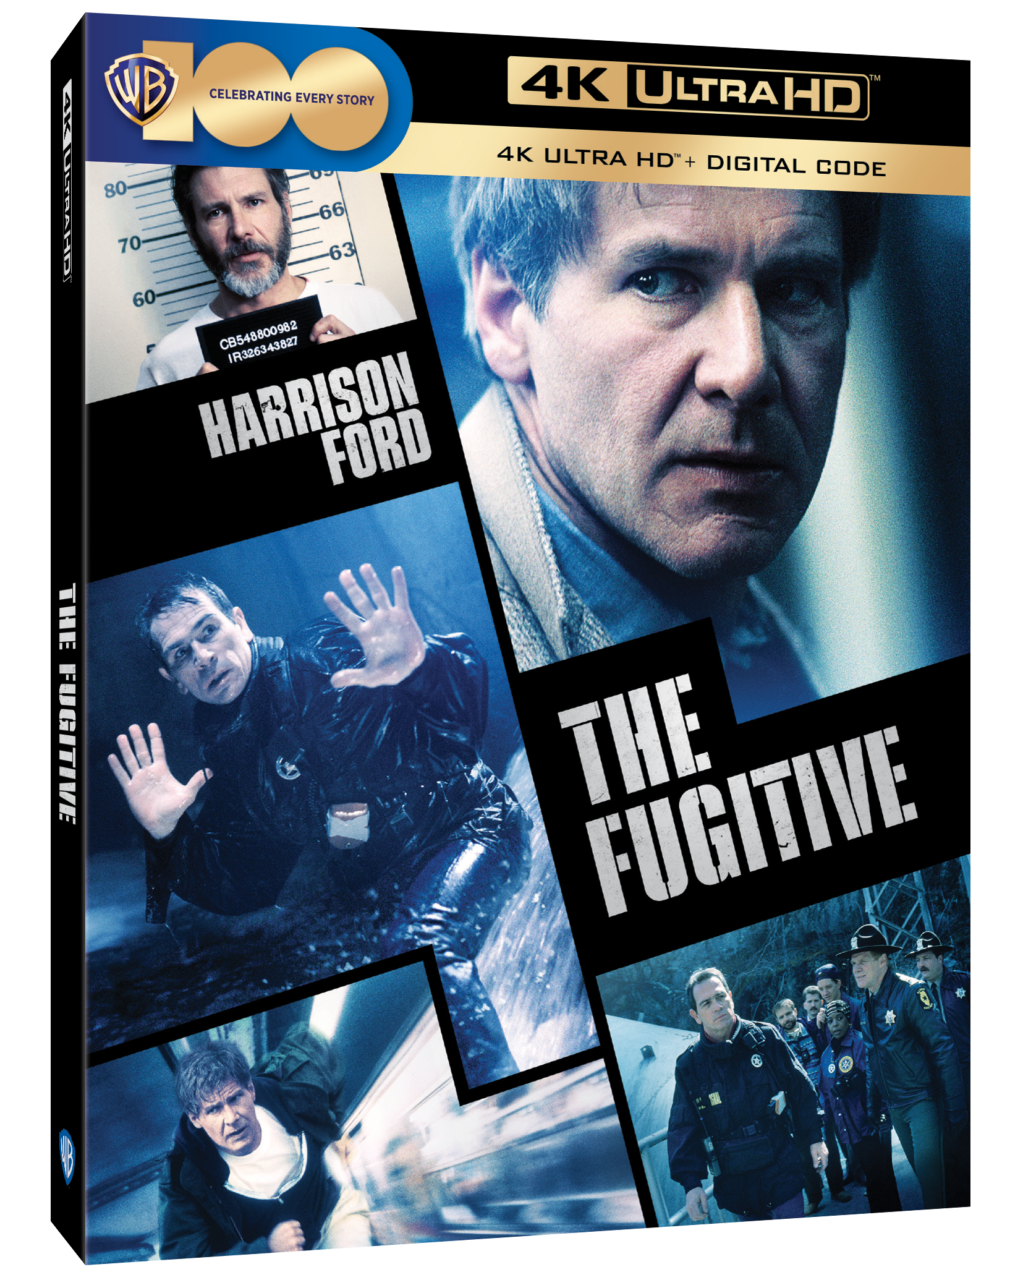 The Fugitive 4K Ultra HD Combo Pack cover (Warner Bros. Discovery Home Entertainment)